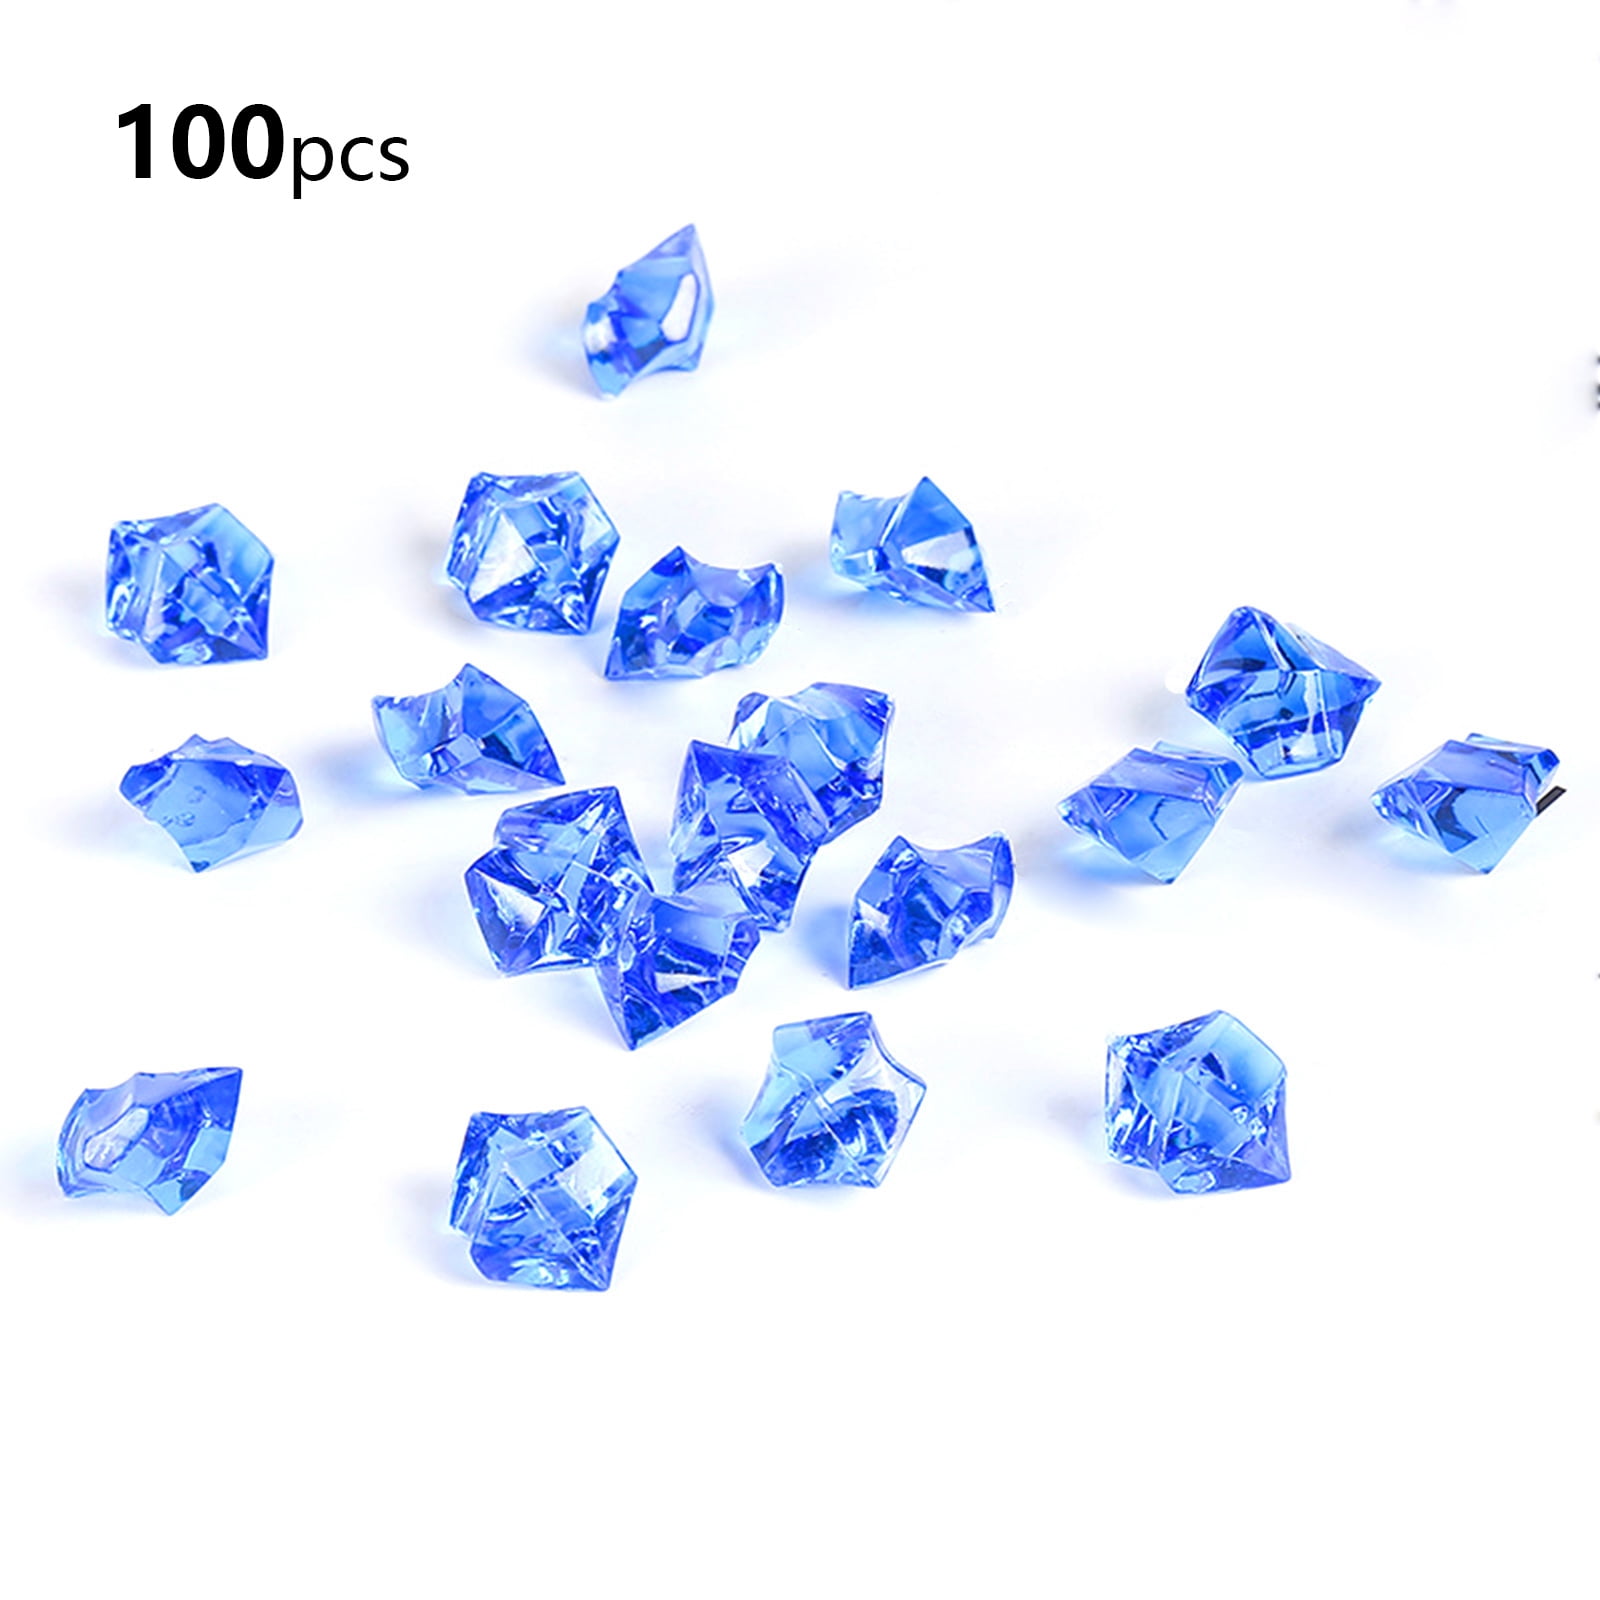 æ—  100 Pcs Clear Acrylic Ice Rocks Irregular Artificial Crystals Diamond Simulation Ice Cubes Gems Crushed Gems For Vase Fillers Home Wedding Birthday Decoration 